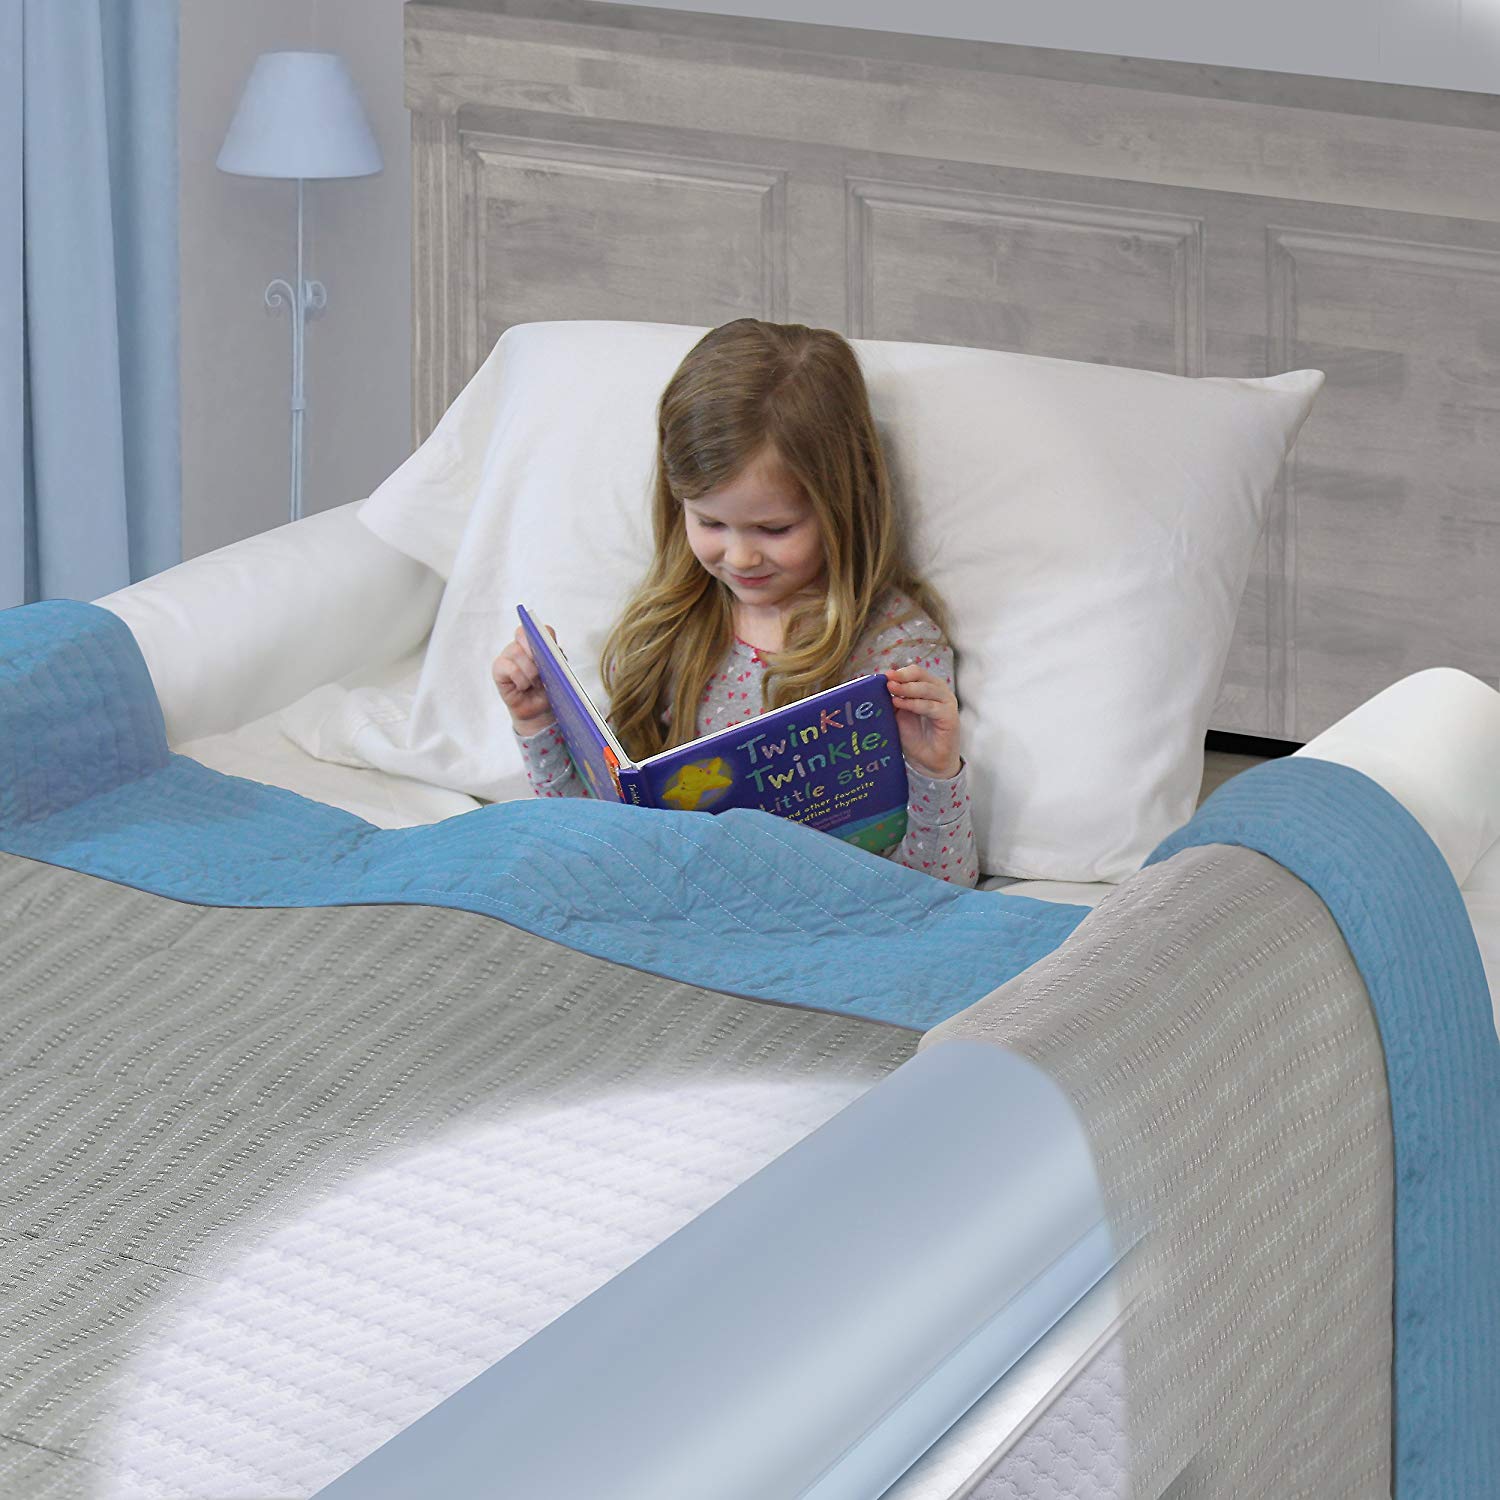 Royexe – The Original Bed Rails for Toddlers